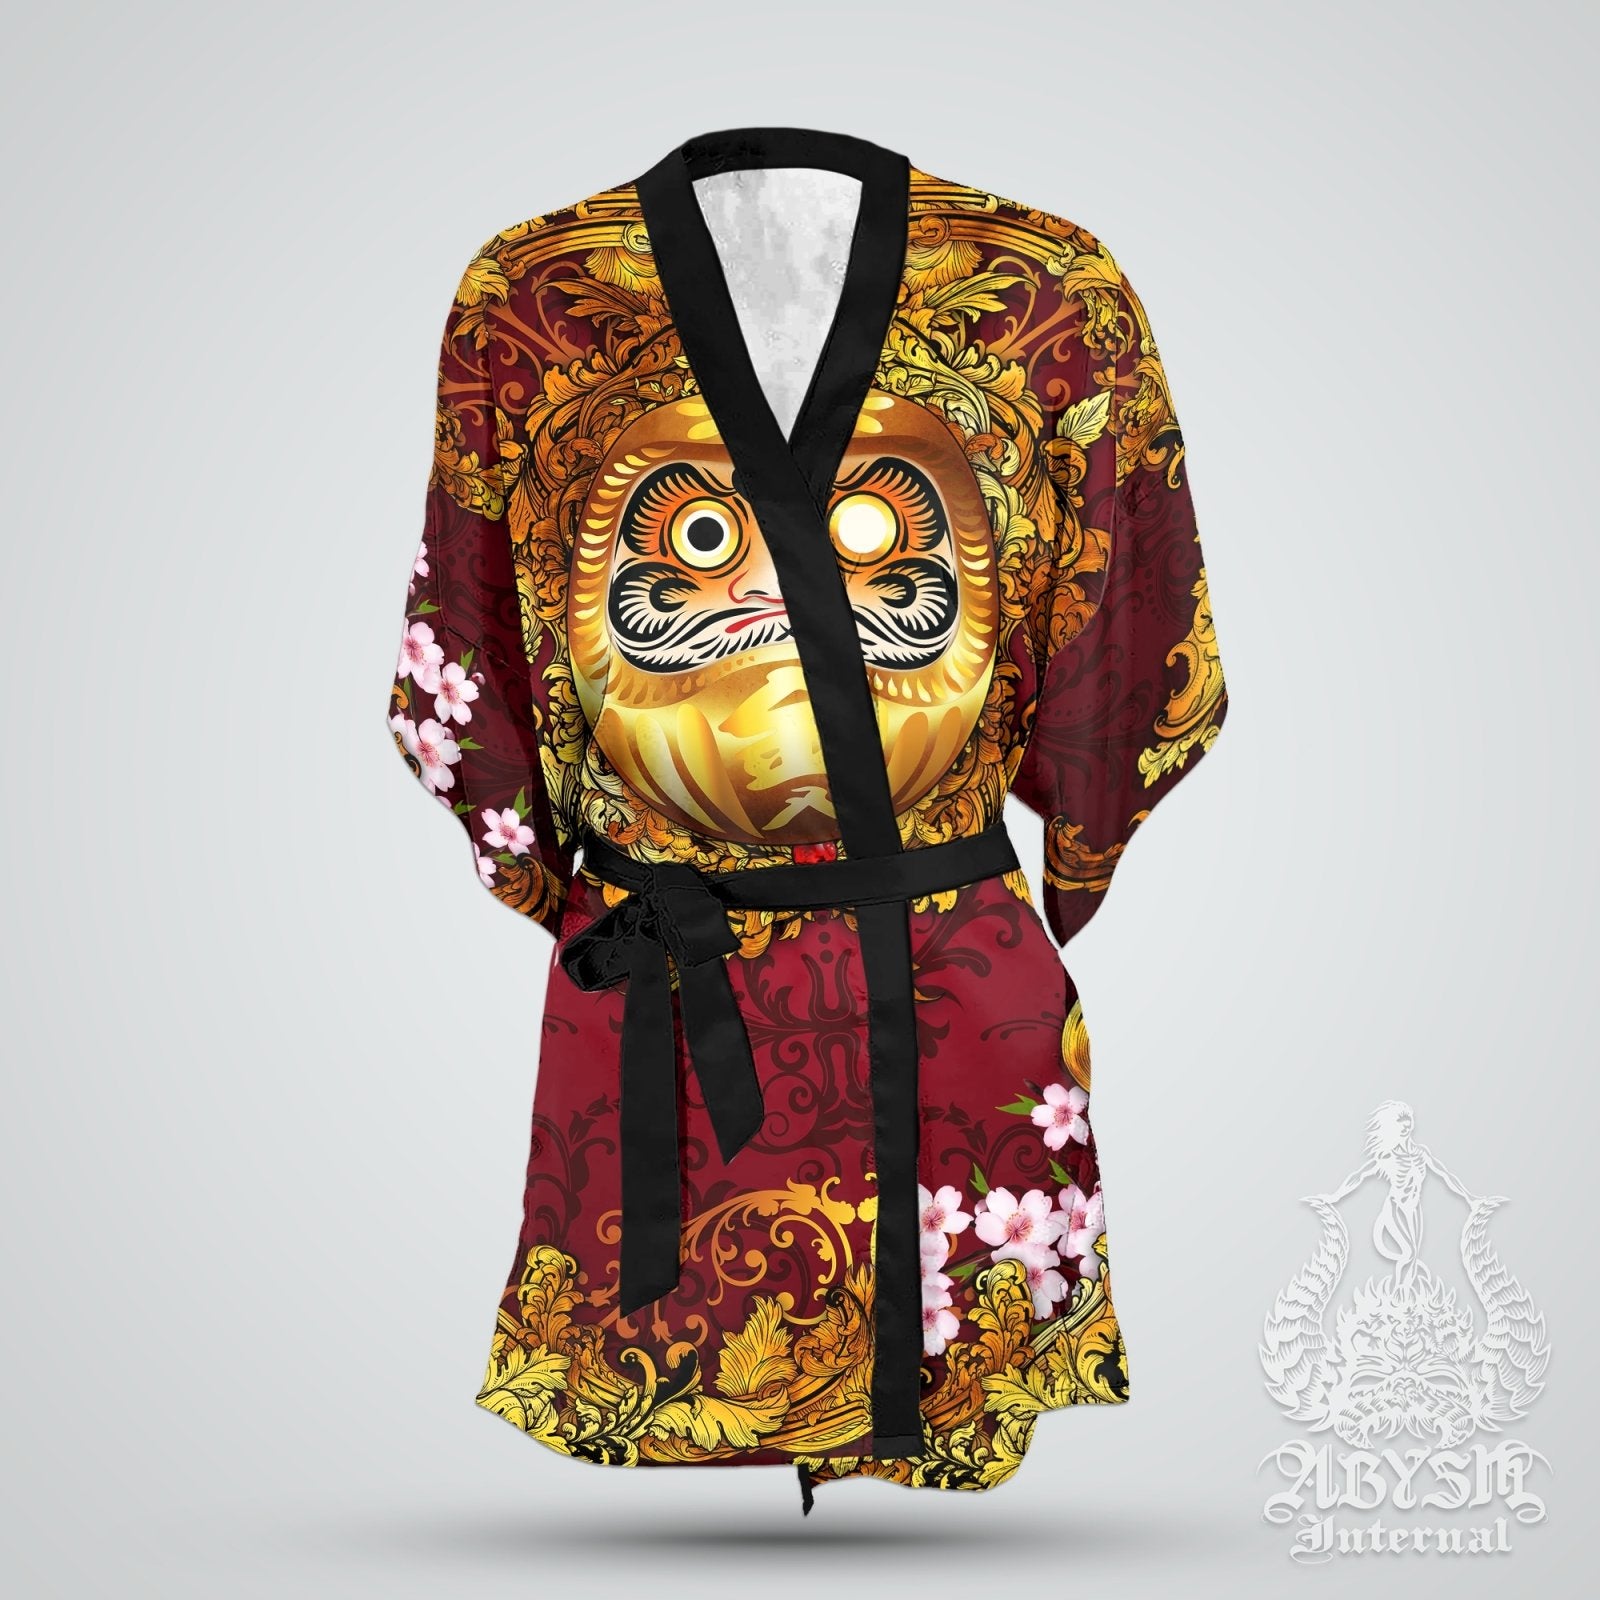 Daruma Cover Up, Beach Outfit, Party Kimono, Japanese Summer Festival Robe, Indie and Alternative Clothing, Unisex - Gold - Abysm Internal